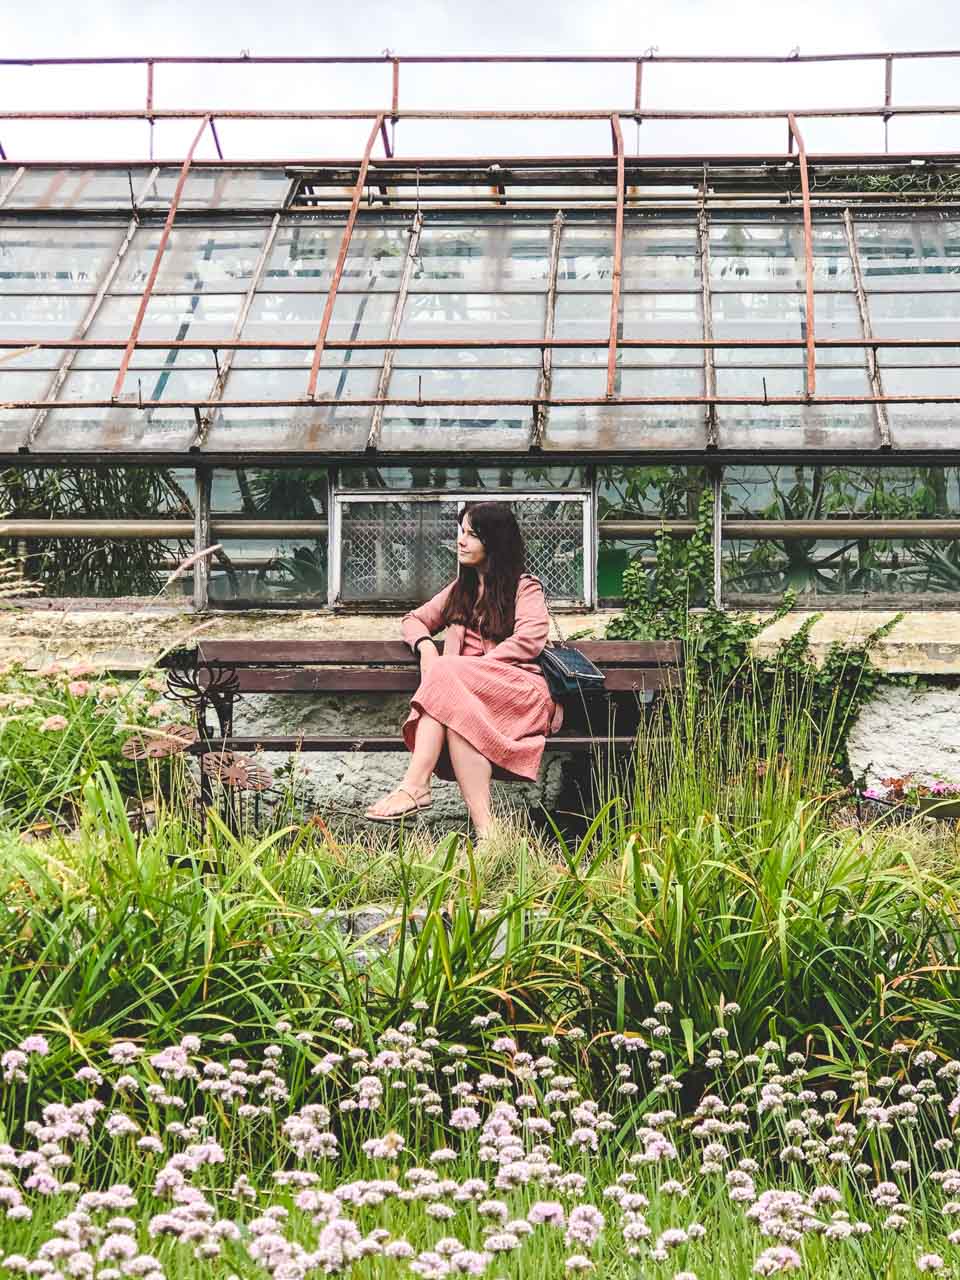 A woman in a pink dress looking to the side as she sits on a bench in front of a greenhouse